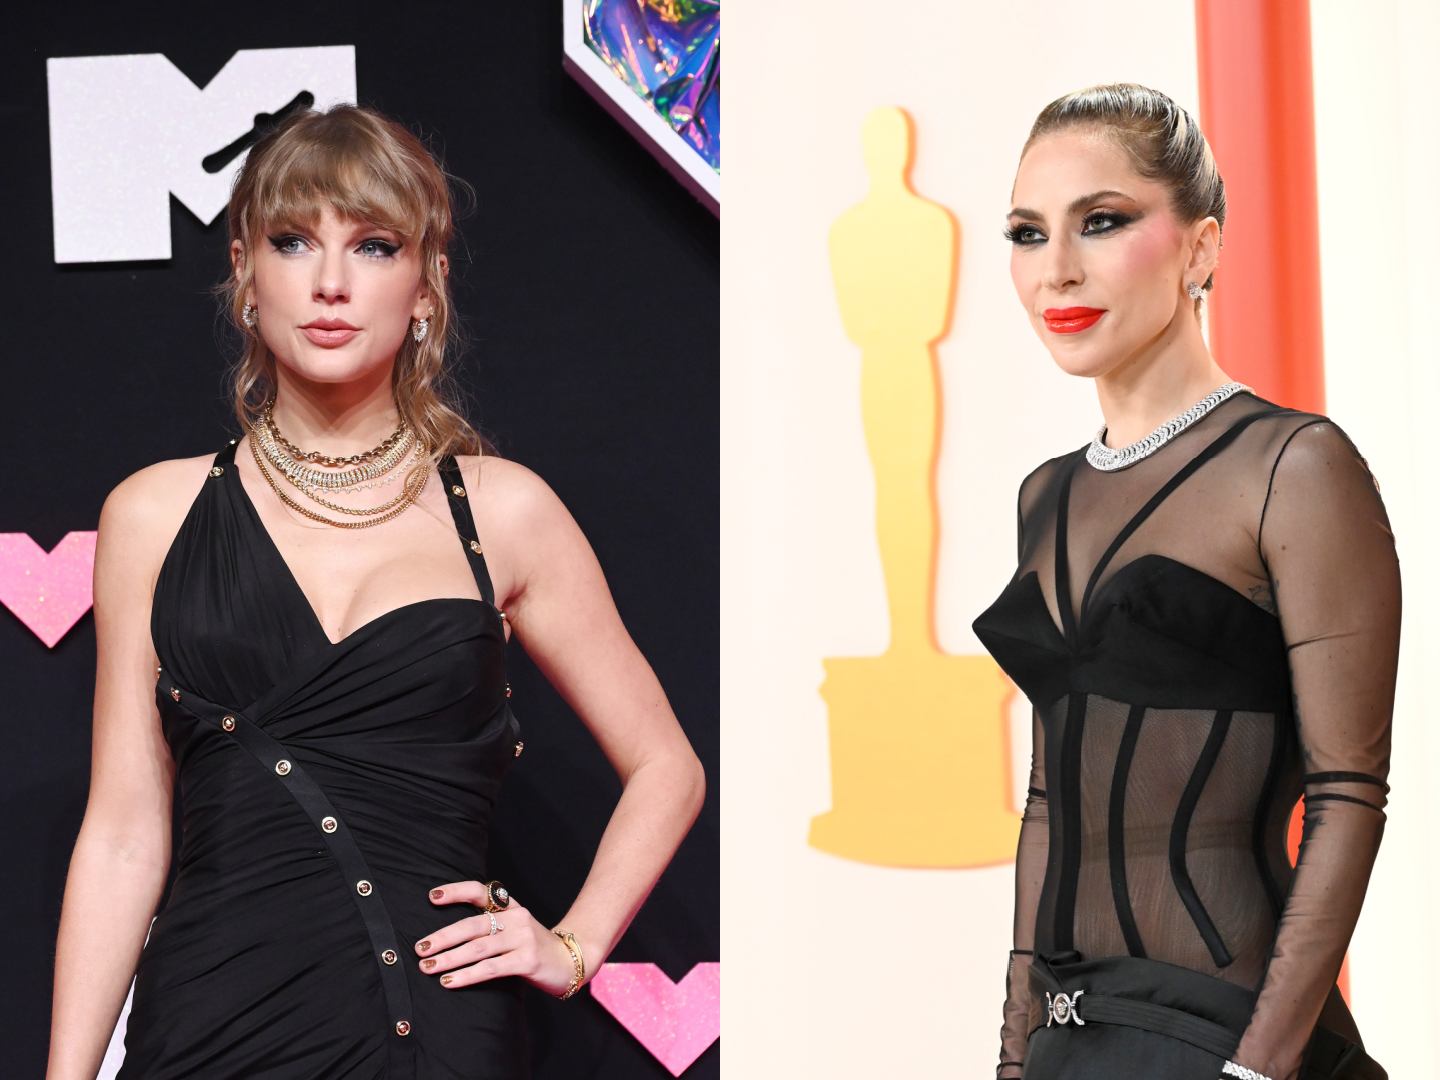 Taylor Swift Slams Trolls Speculating if Lady Gaga Is Pregnant in Rare New Comment